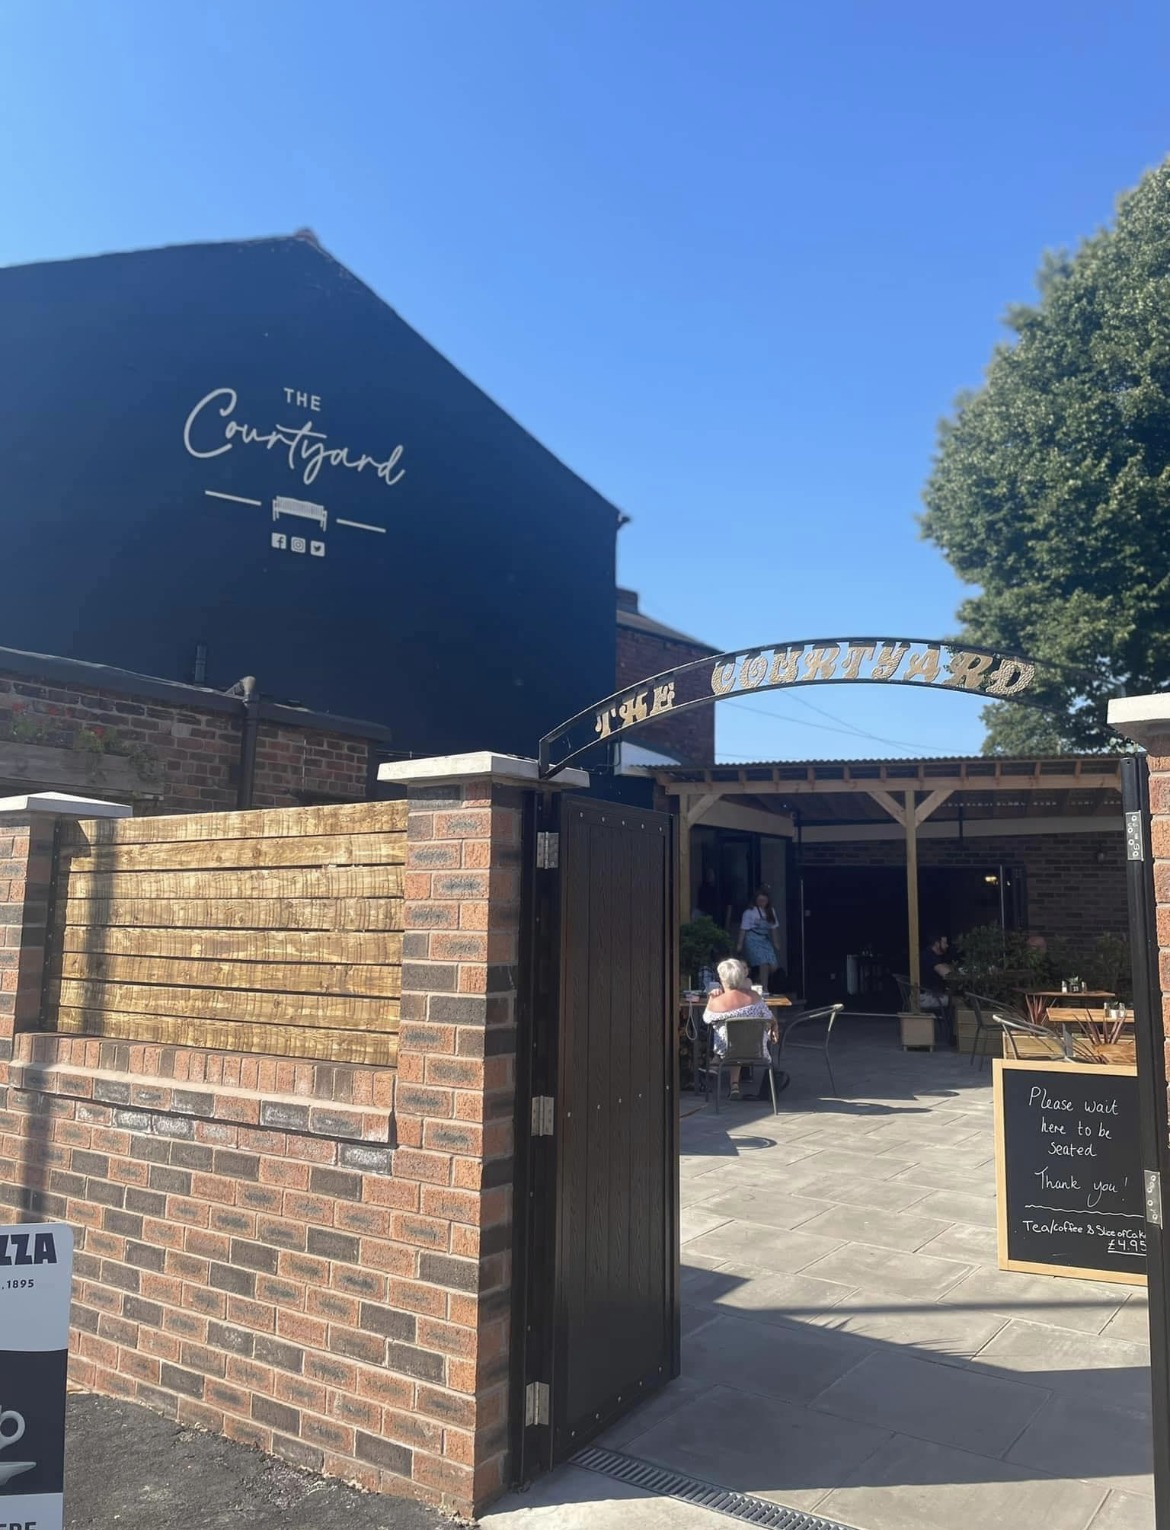 The Courtyard opened on City Road in May 2022